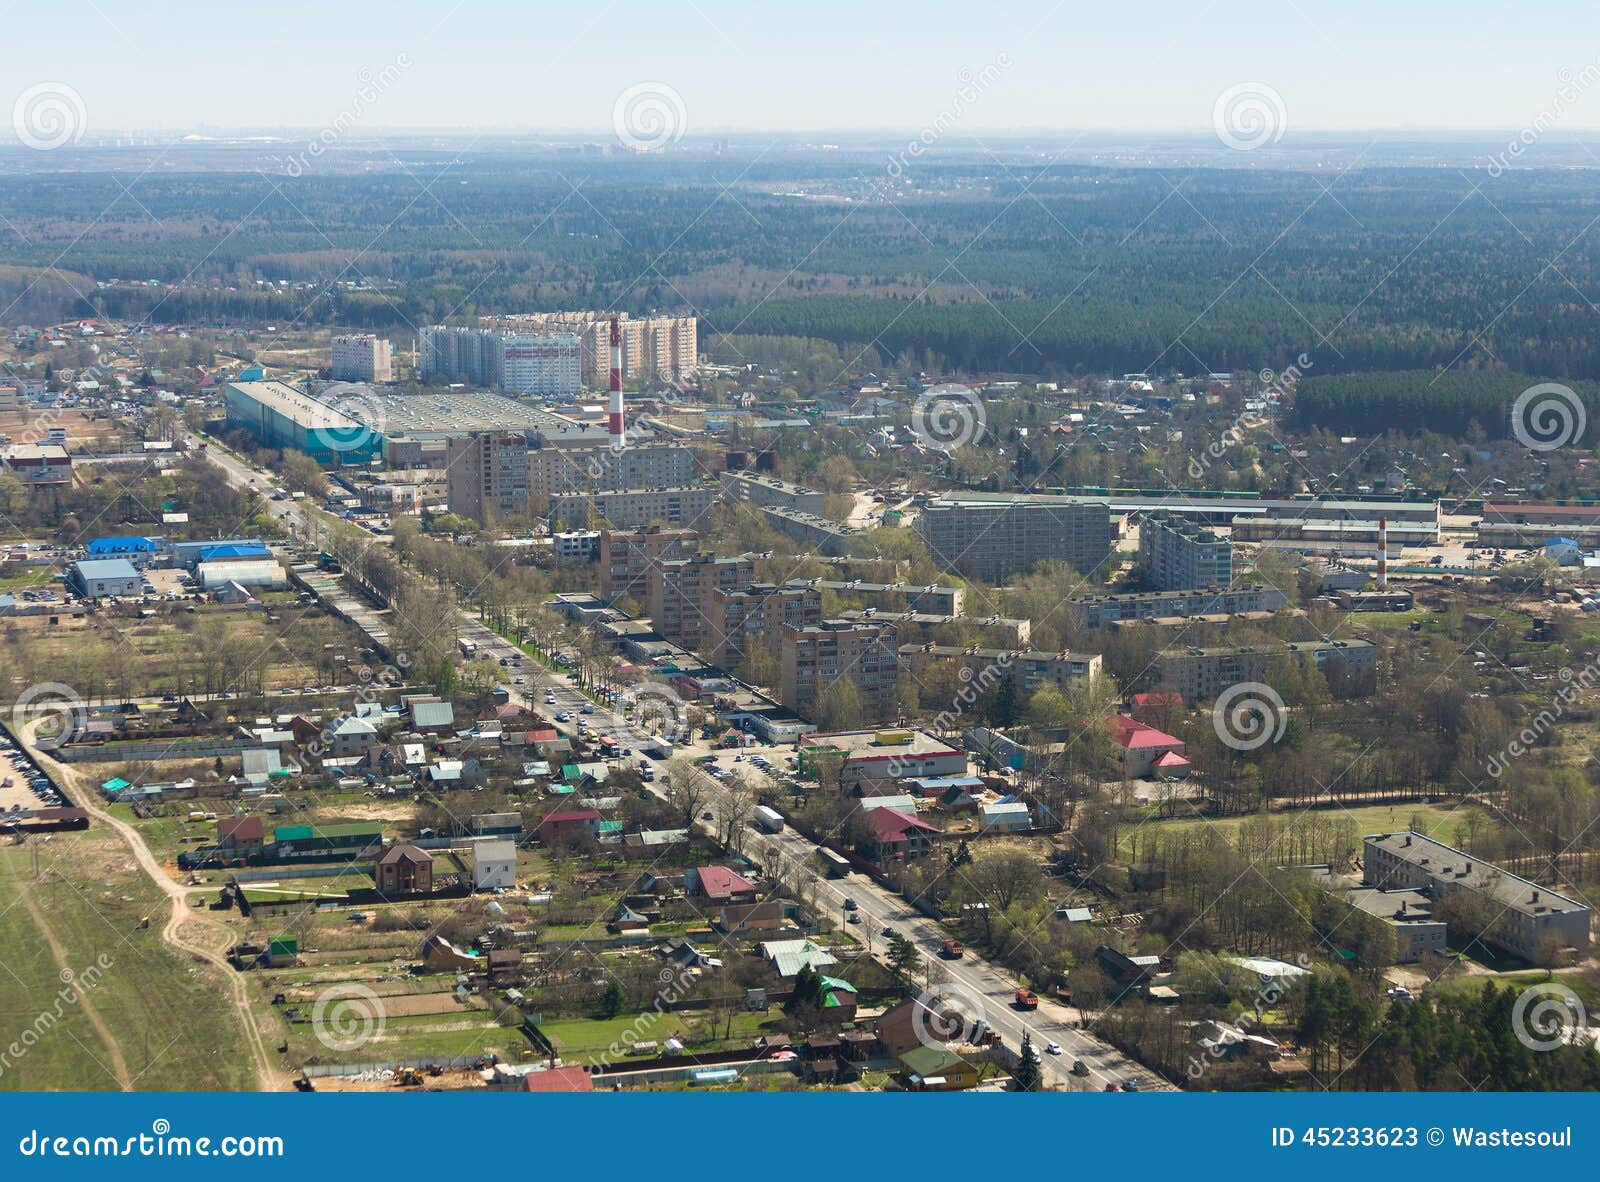 Aerial view of a russian provincial town. Aerial view of a suburban provincial town Bolshie Vyazemy near Moscow from helicopter in Russia.